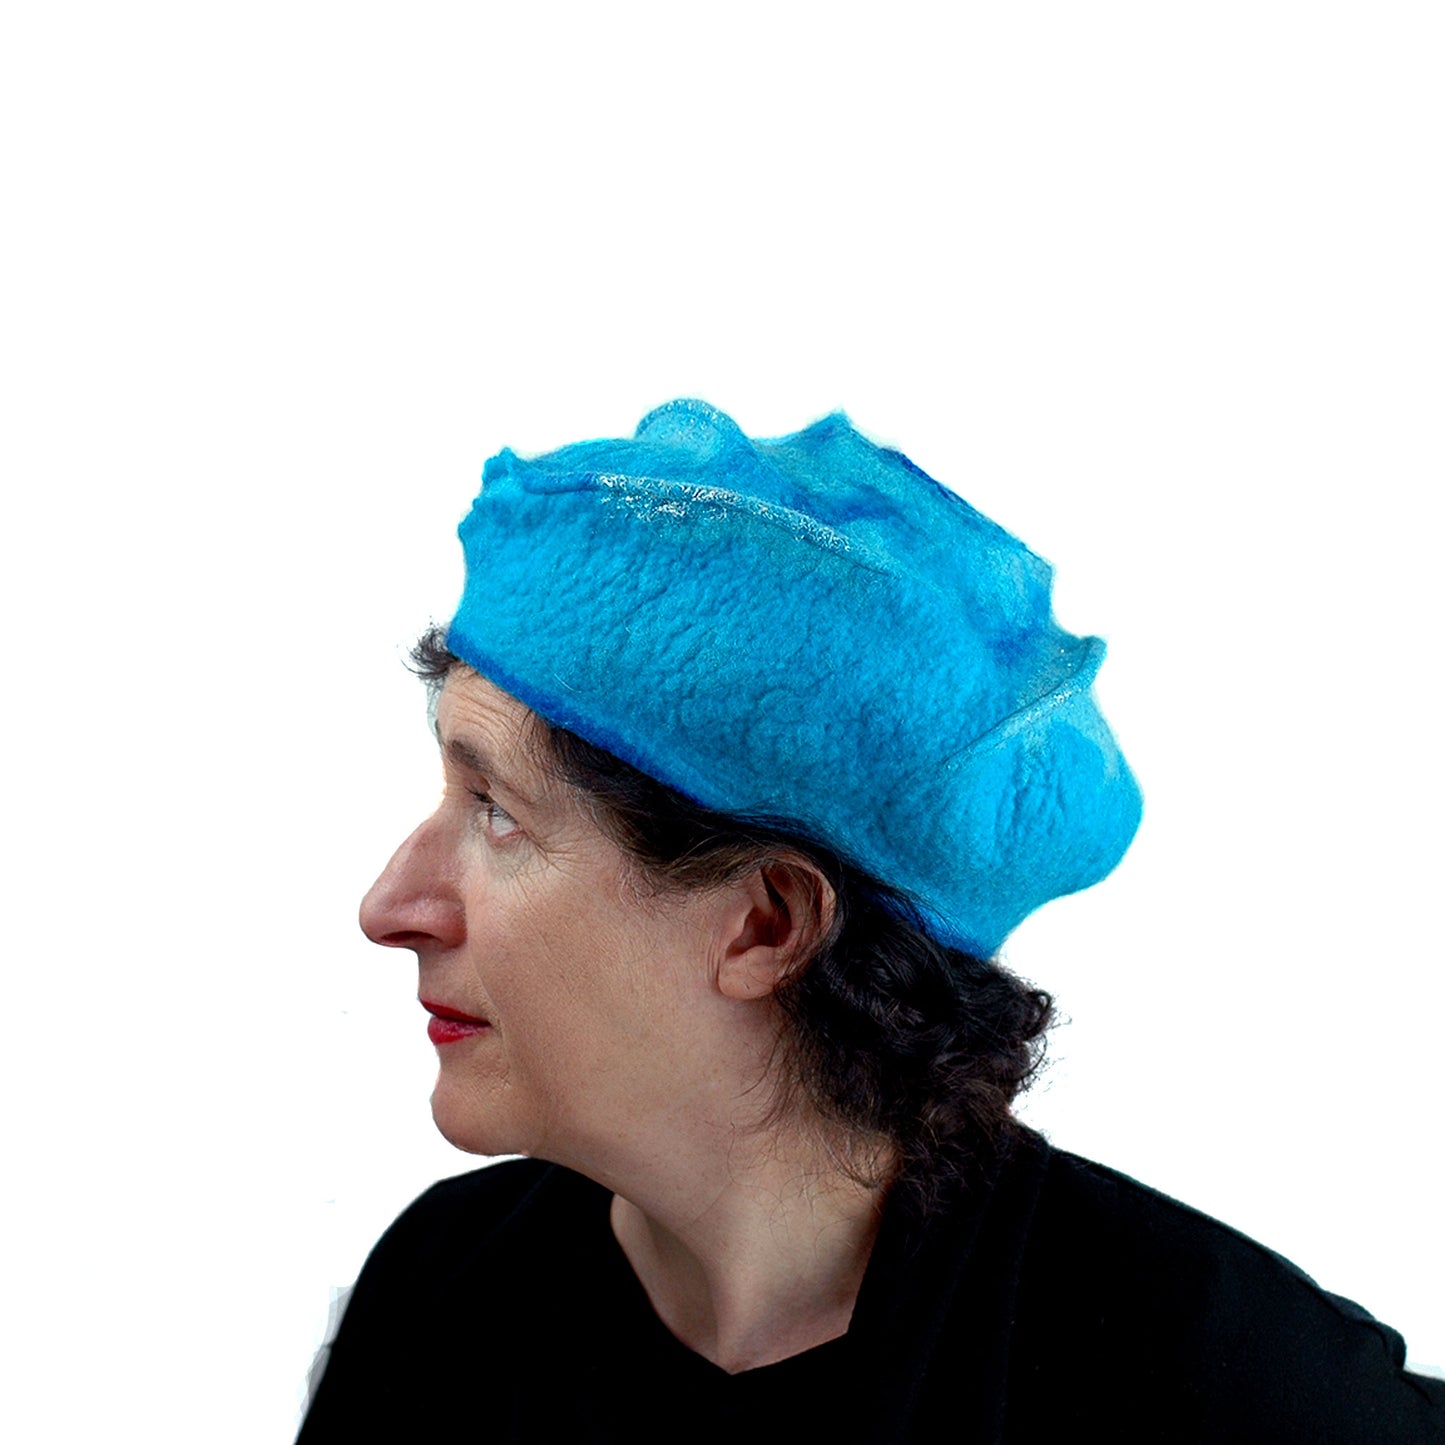 Turquoise Blue Beret with Concentric Circles / Fibonacci Rose on Top - side 2